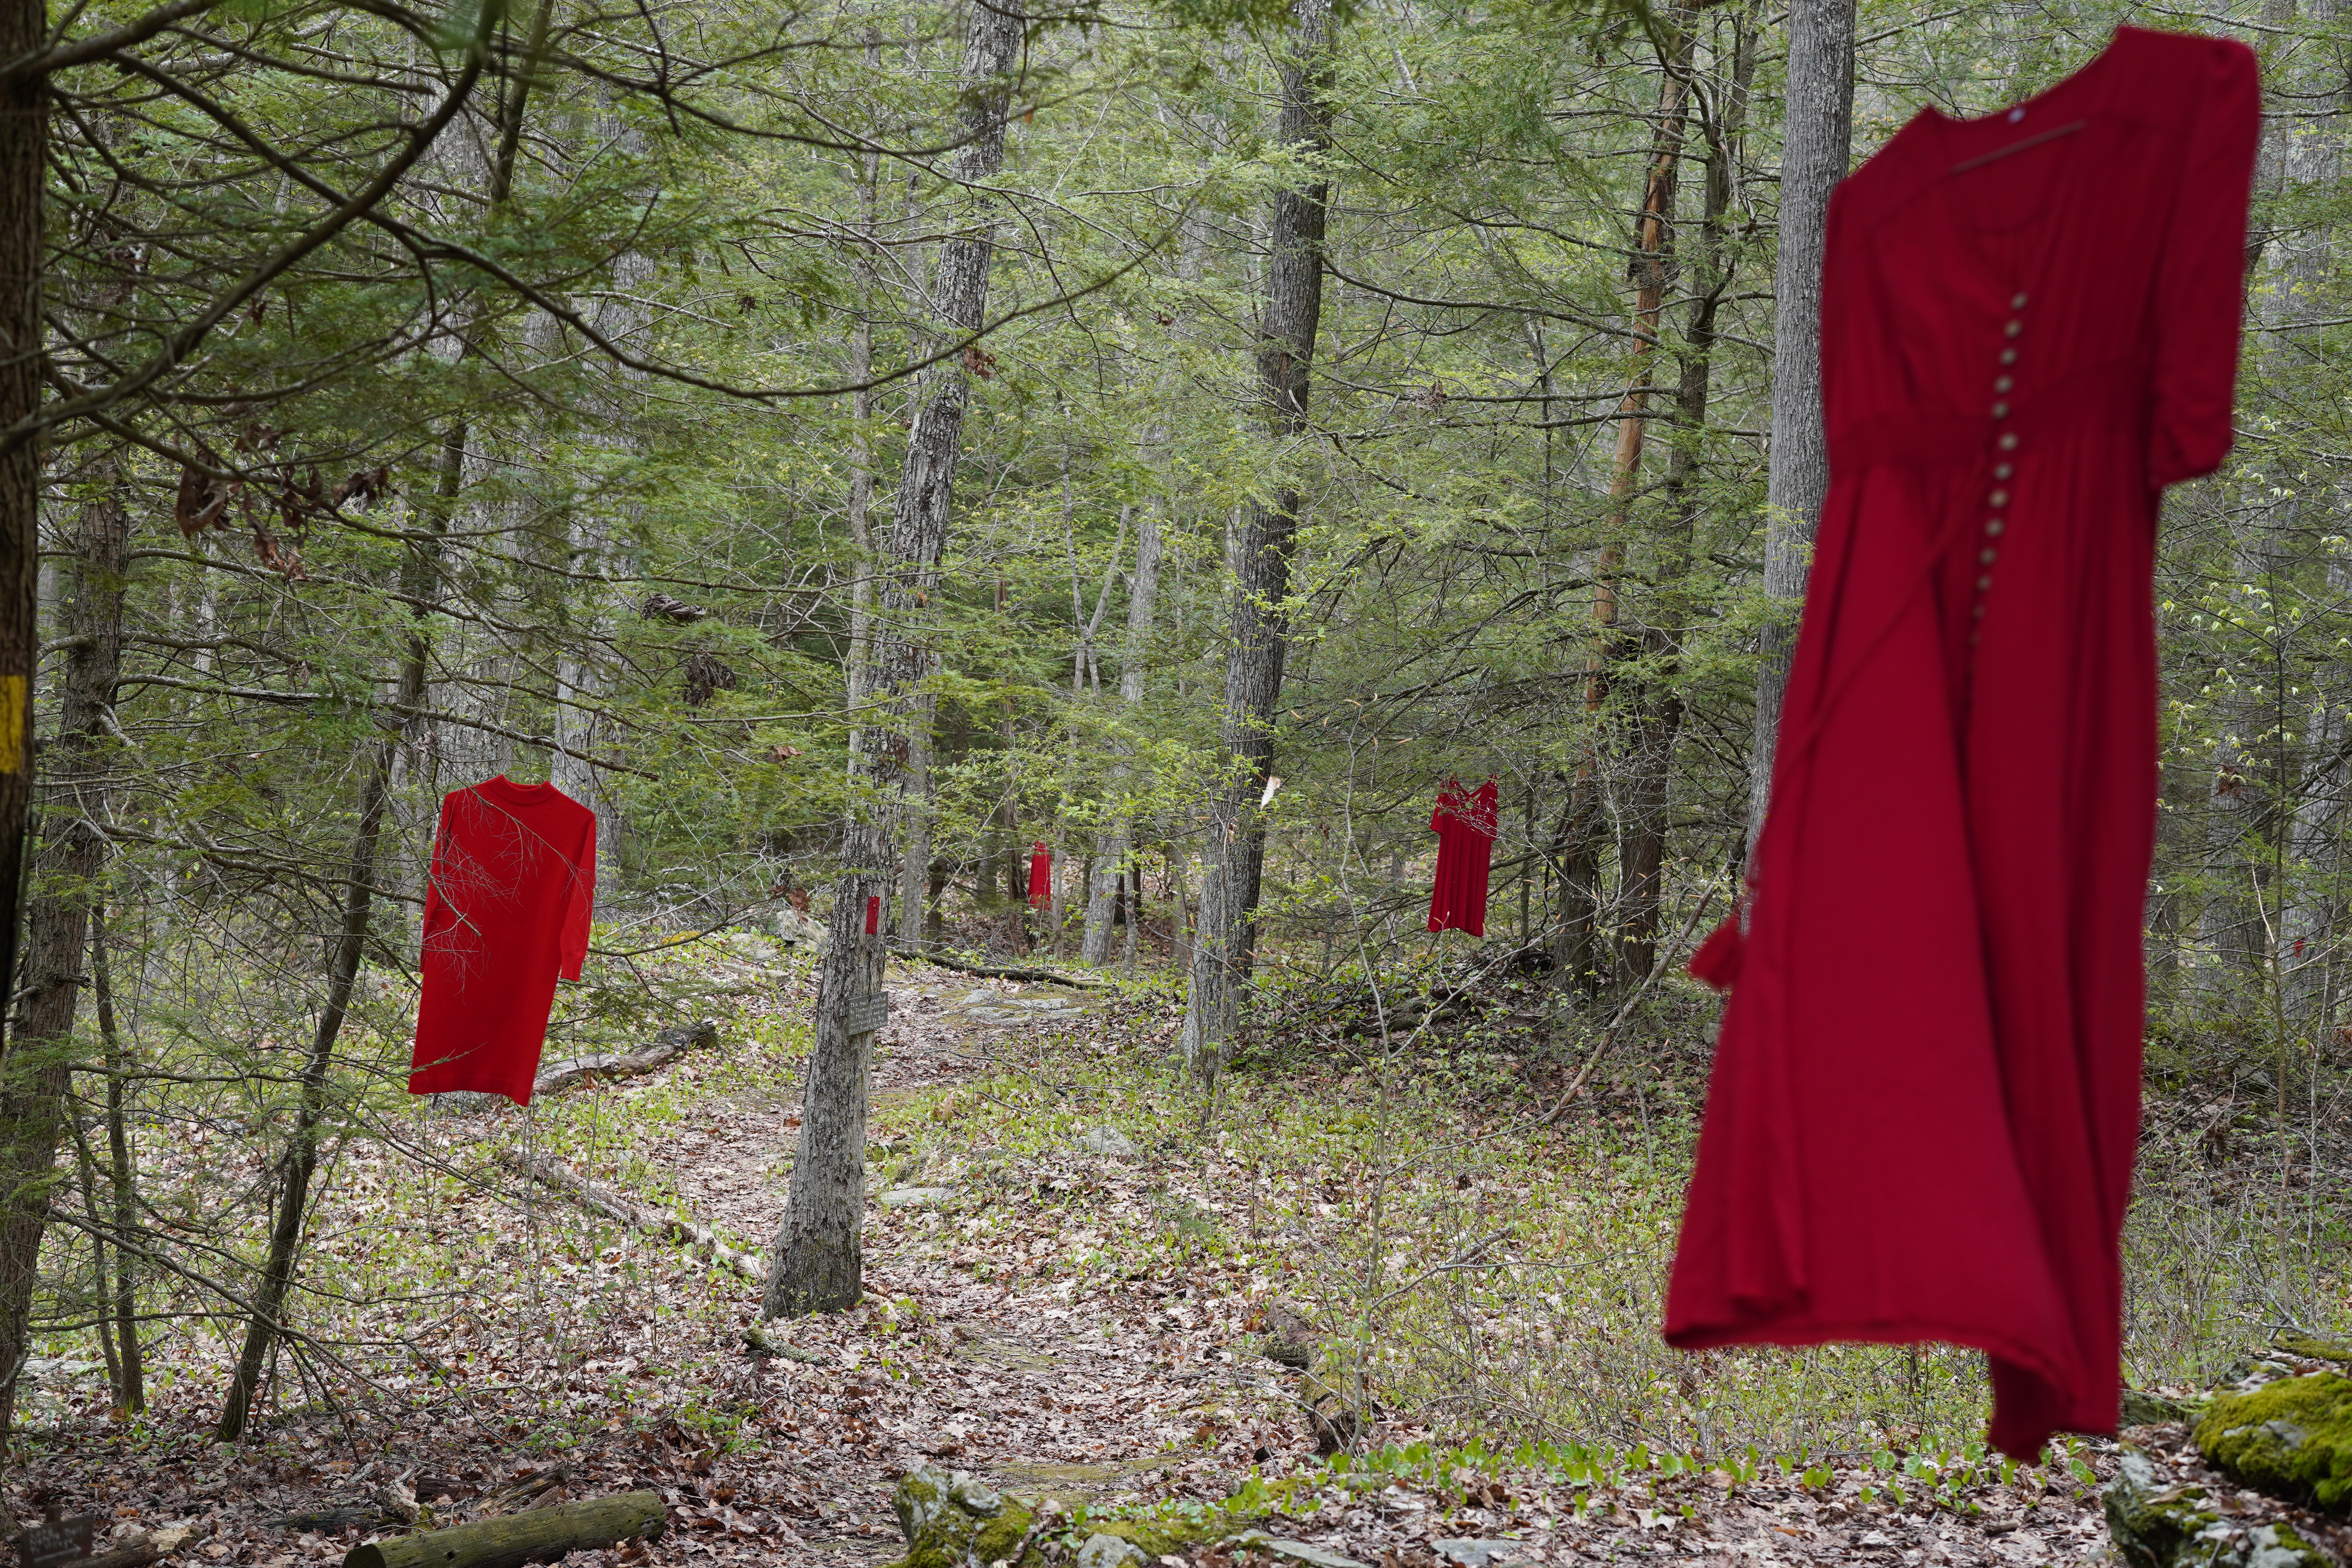 images of the red dress project, red dresses hanging on hangers in the forest